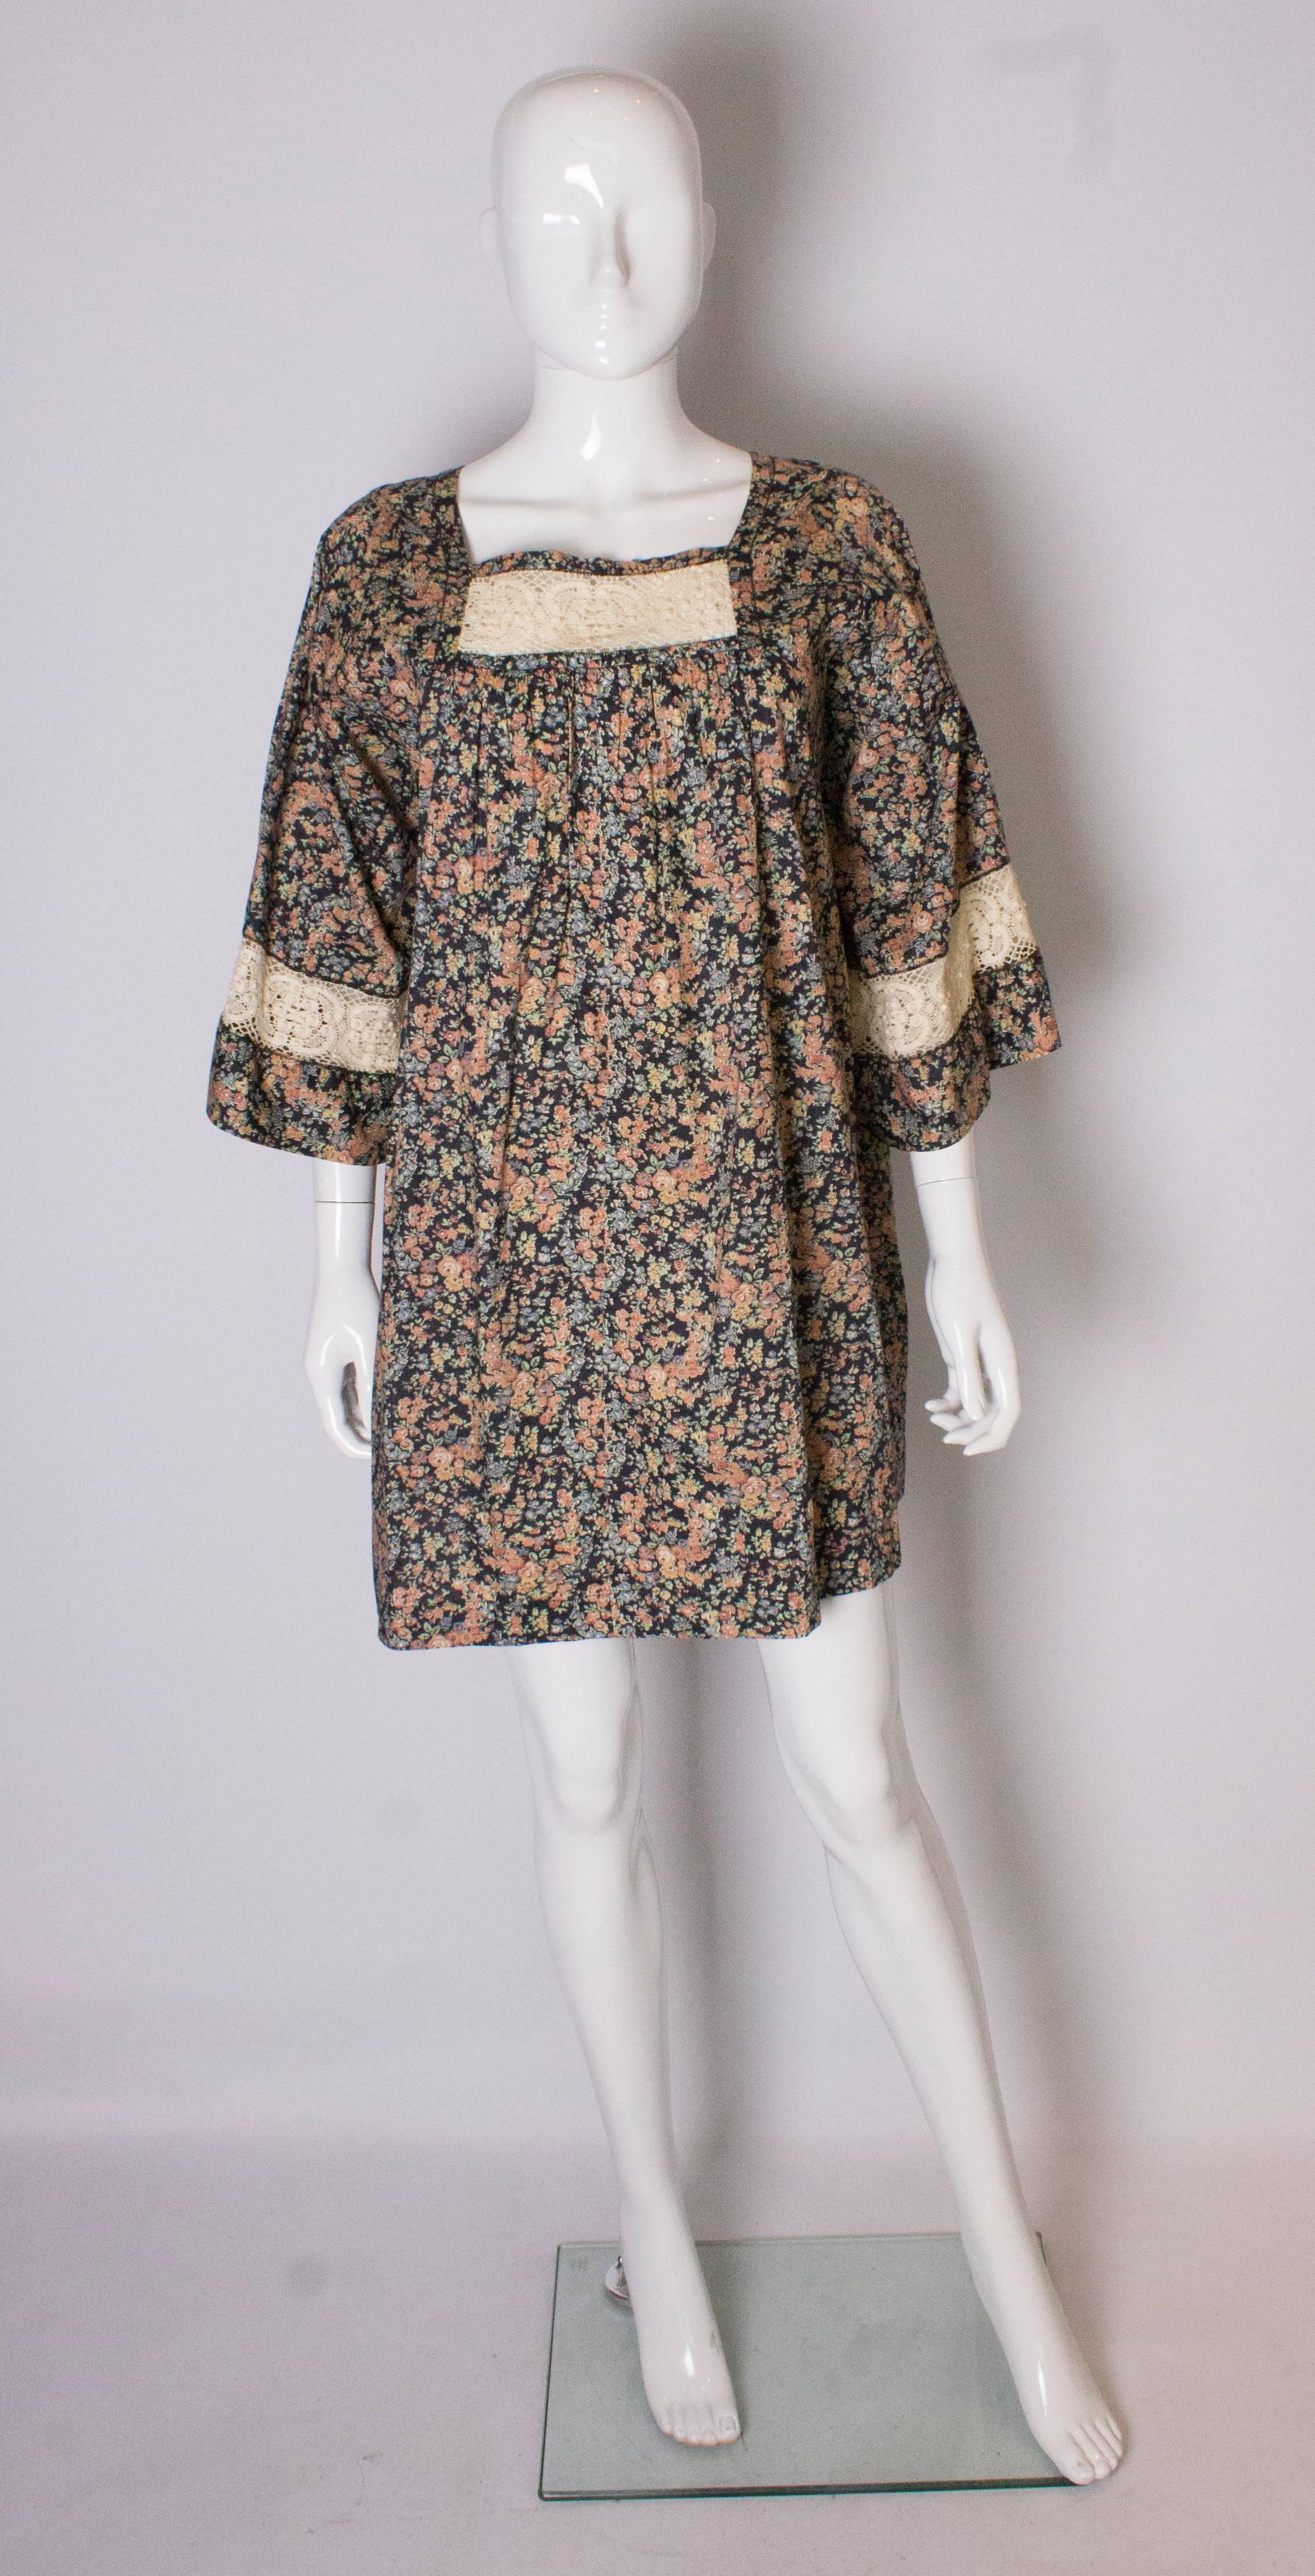 A pretty top for Spring/Summer. In a Liberty floral print on a black background, the top has a lace trim over the bust and at the end of the sleeves.The top is marked size M , and will fit a bust up to 40''